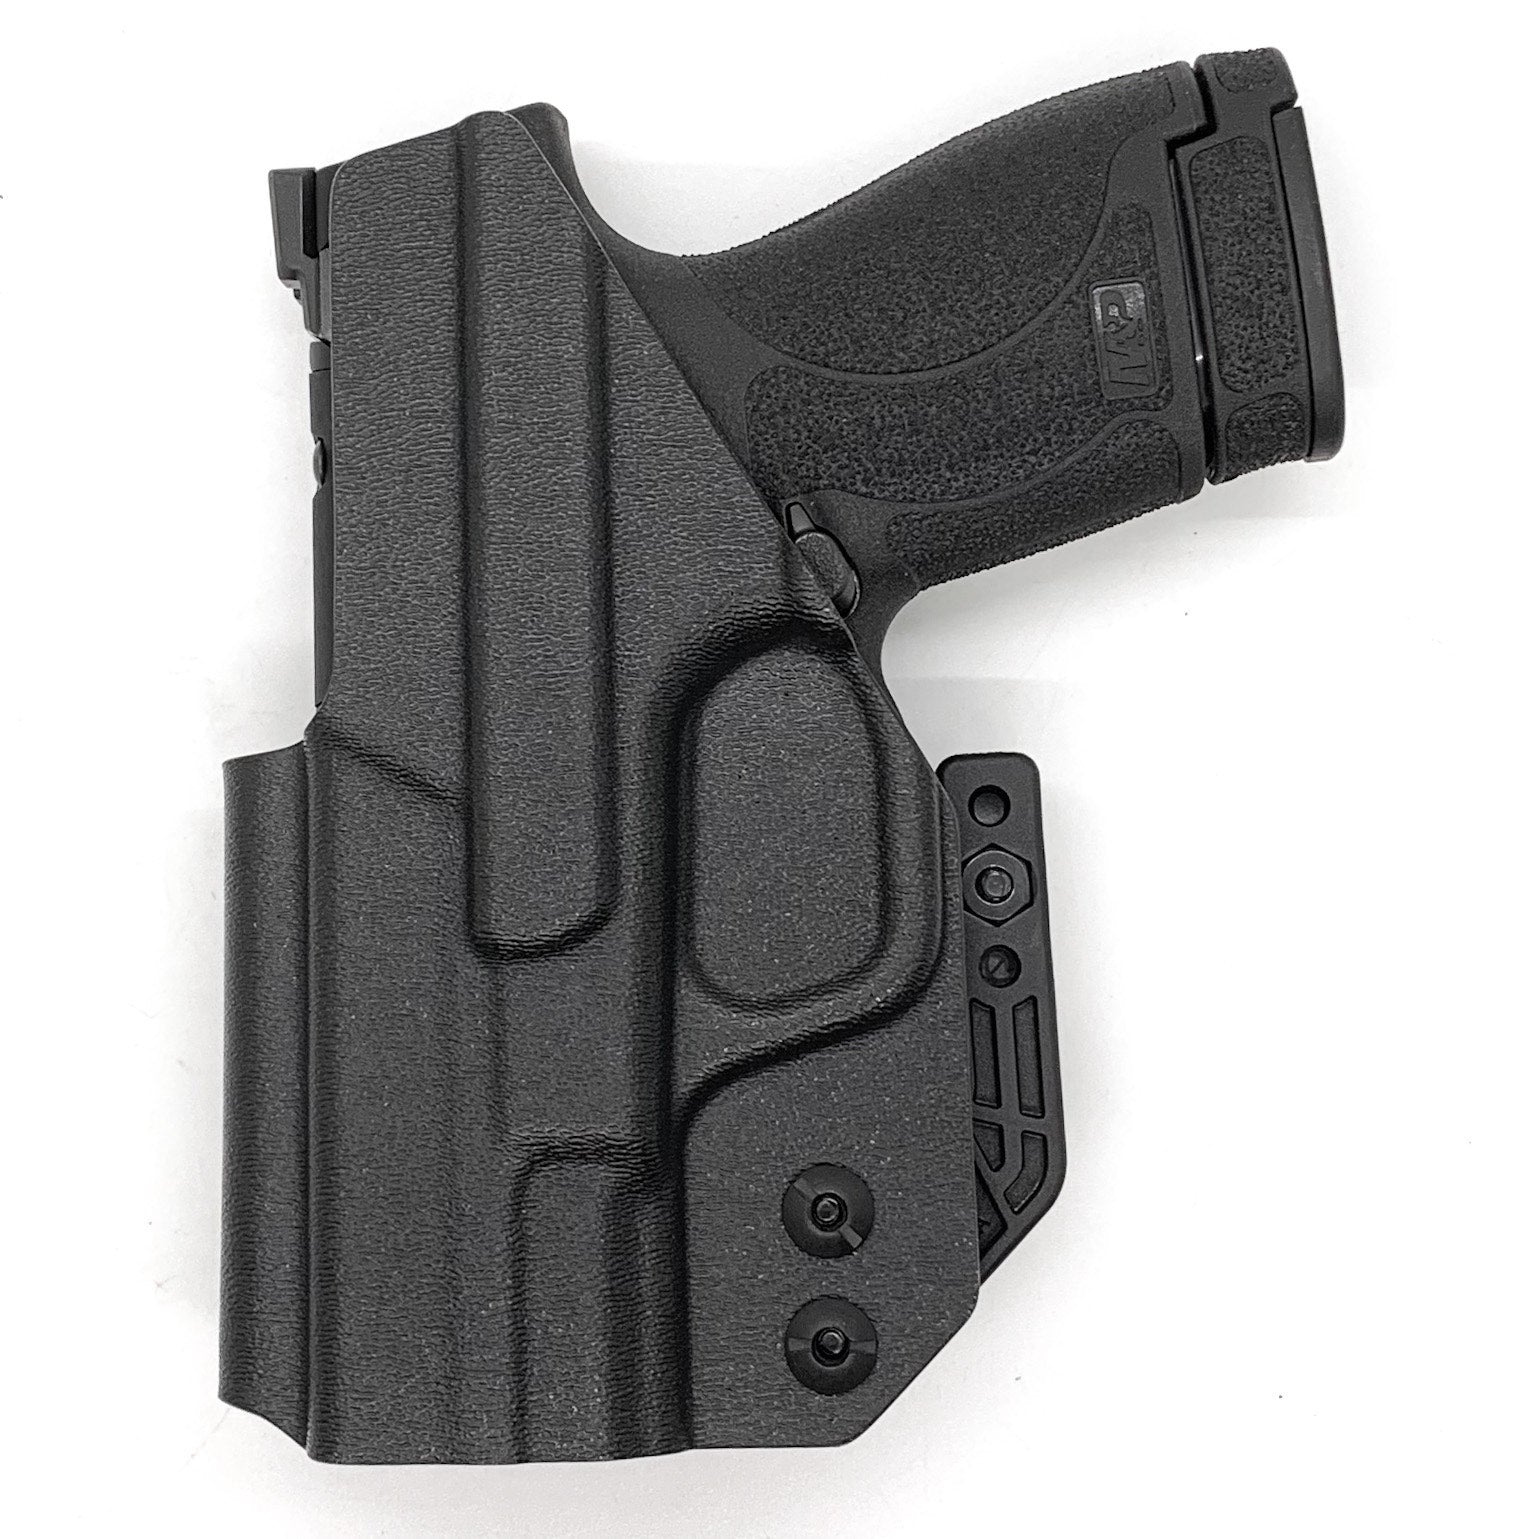 For the 2022 BEST Inside Waistband IWB AIWB Kydex Holster designed to fit the Smith and Wesson S&W Shield Plus handgun, shop Four Brothers Holsters.  Full sweat guard, adjustable retention, minimal material, & smooth edges to reduce printing. Made in the USA. Open muzzle for threaded barrel, cleared for red dot sights.